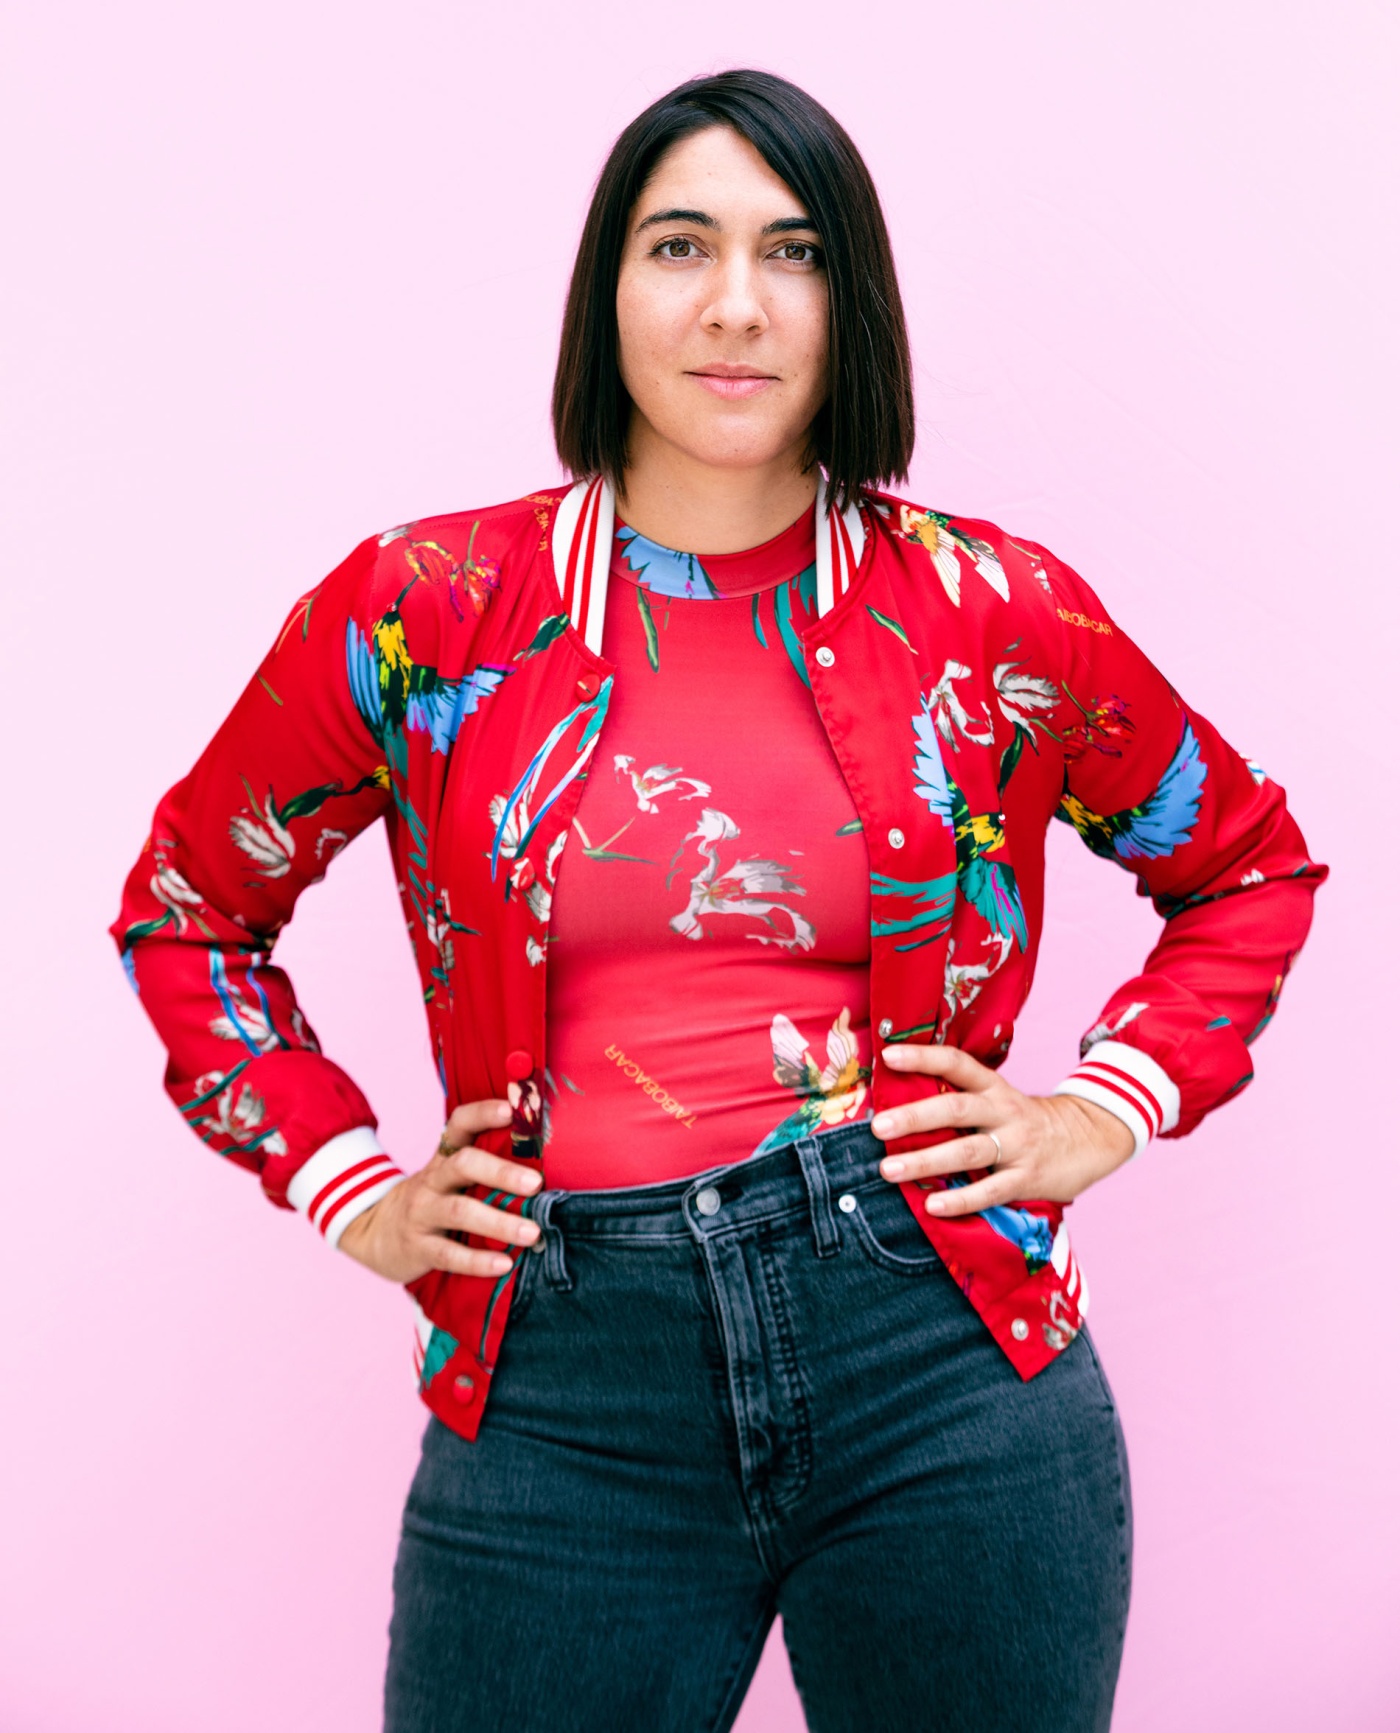 Image of Bridget Stokes with her hands on her hips, wearing a bright floral shirt with a pink background.